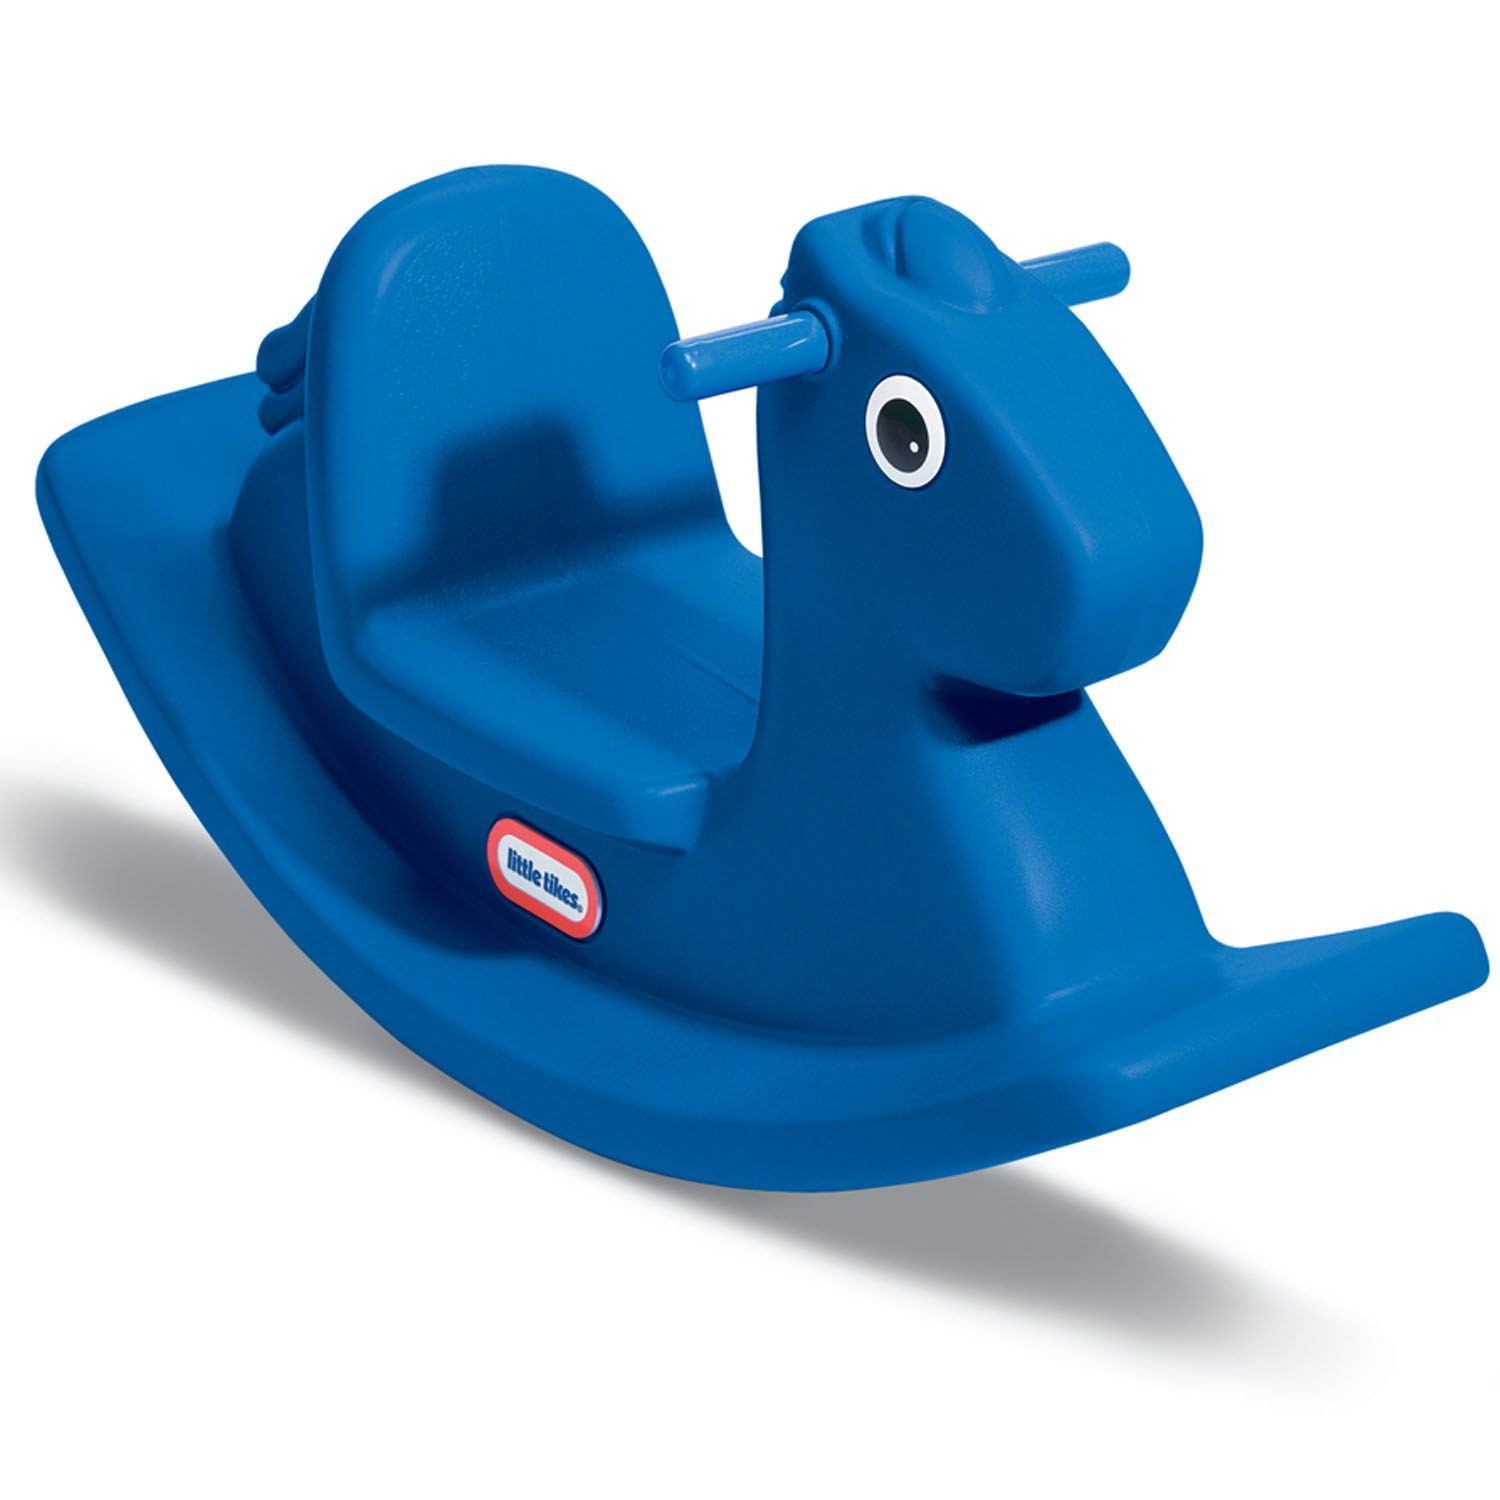 Little Tikes 620171 Outdoor & Indoor Balance Rocking Horse for Toddlers, Blue - 3